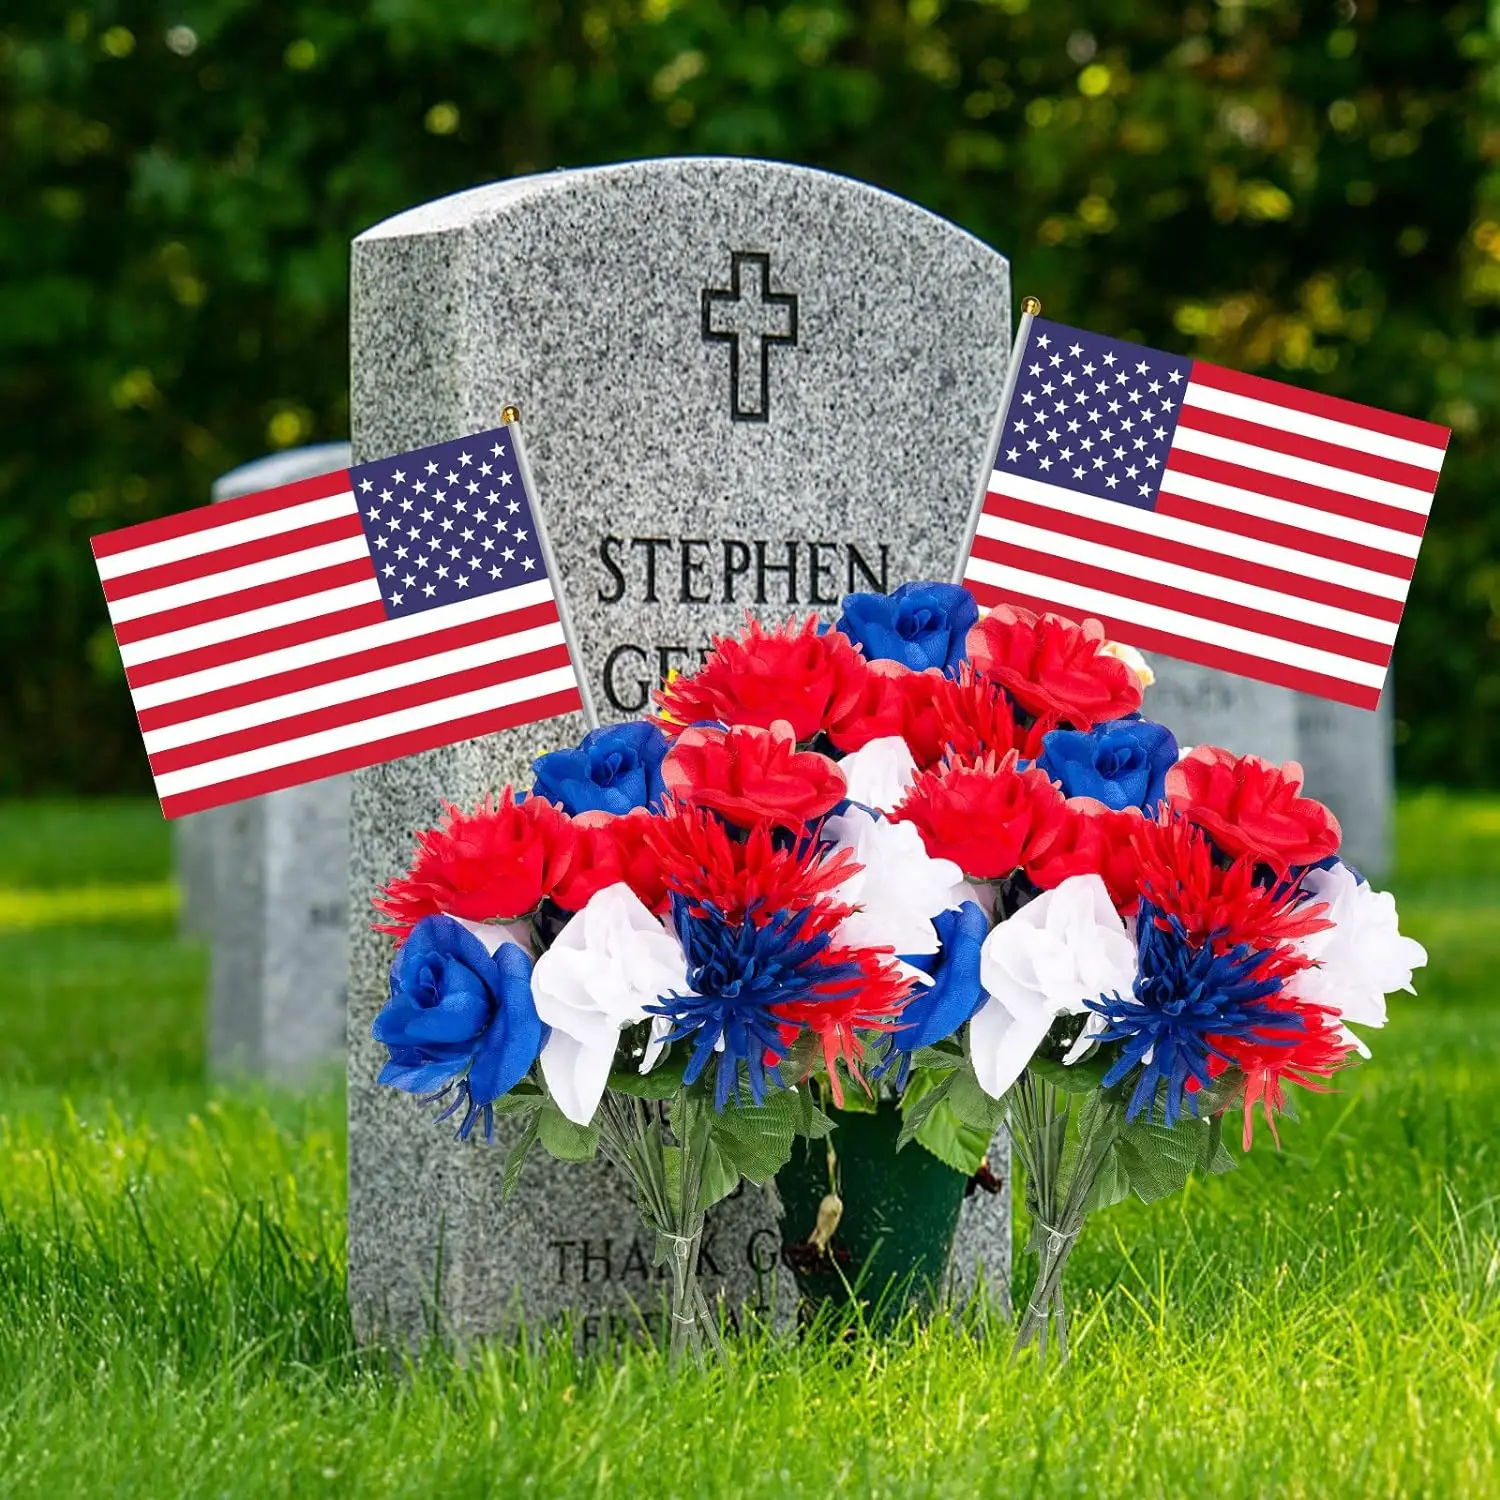 Outdoors Artificial Flowers For Cemetery Decorations Grave Memorial Sympathy Flowers Bouquet